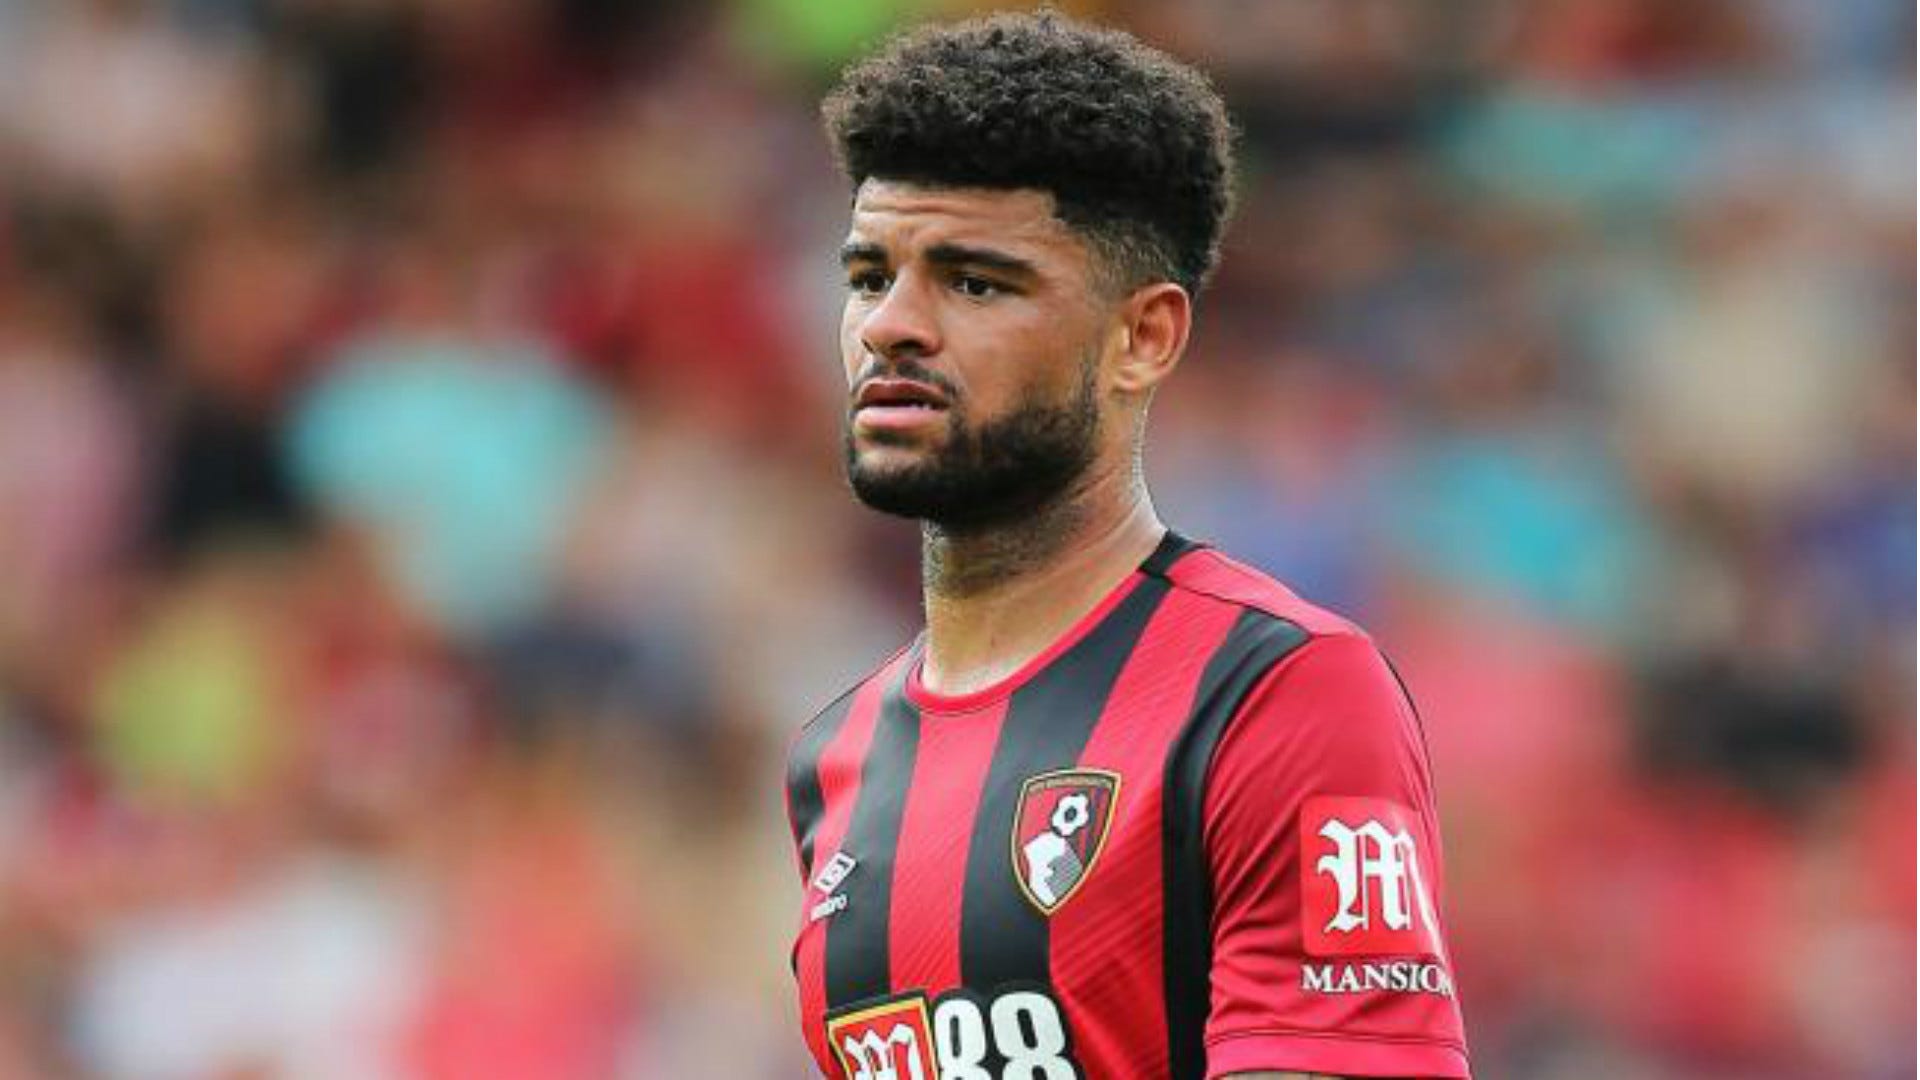 Can Billing save Bournemouth from relegation? | Goal.com India